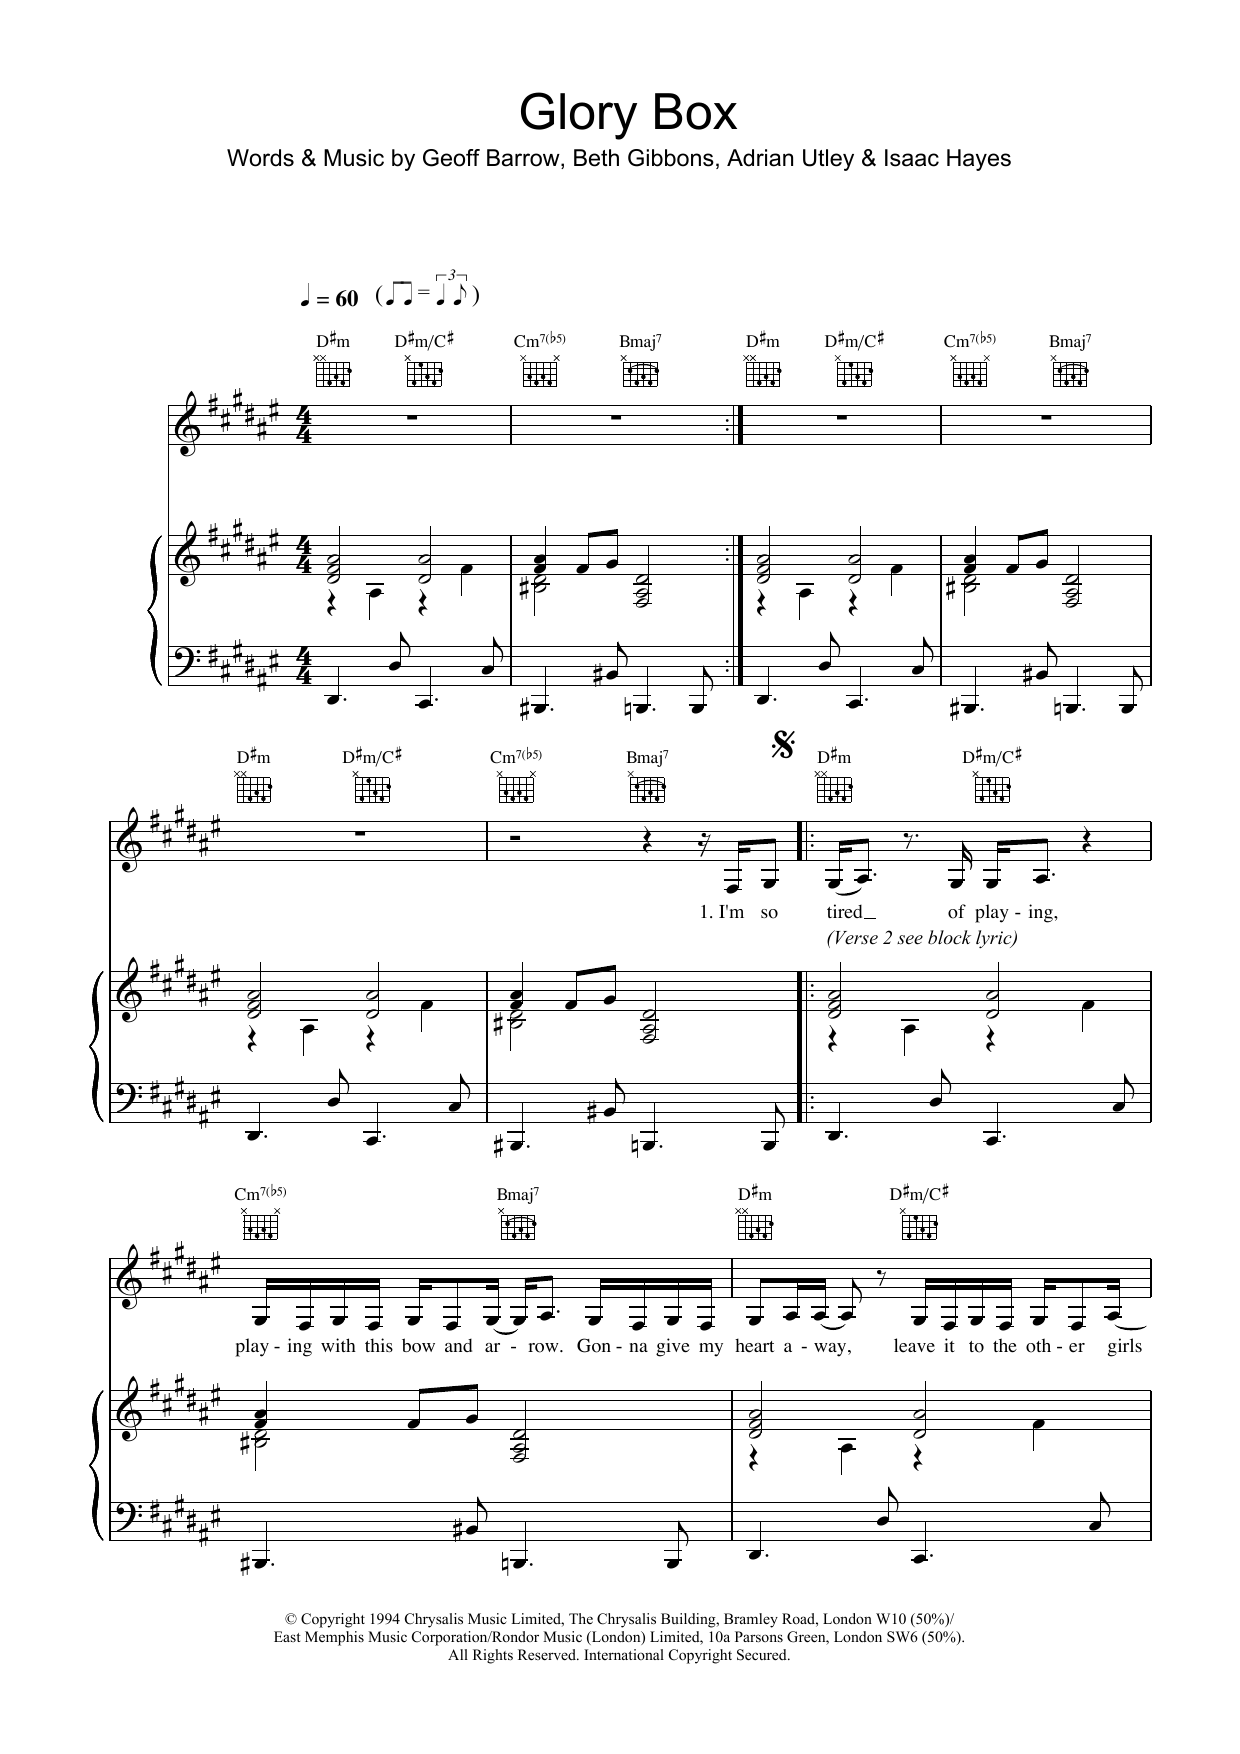 Portishead Glory Box sheet music notes and chords. Download Printable PDF.